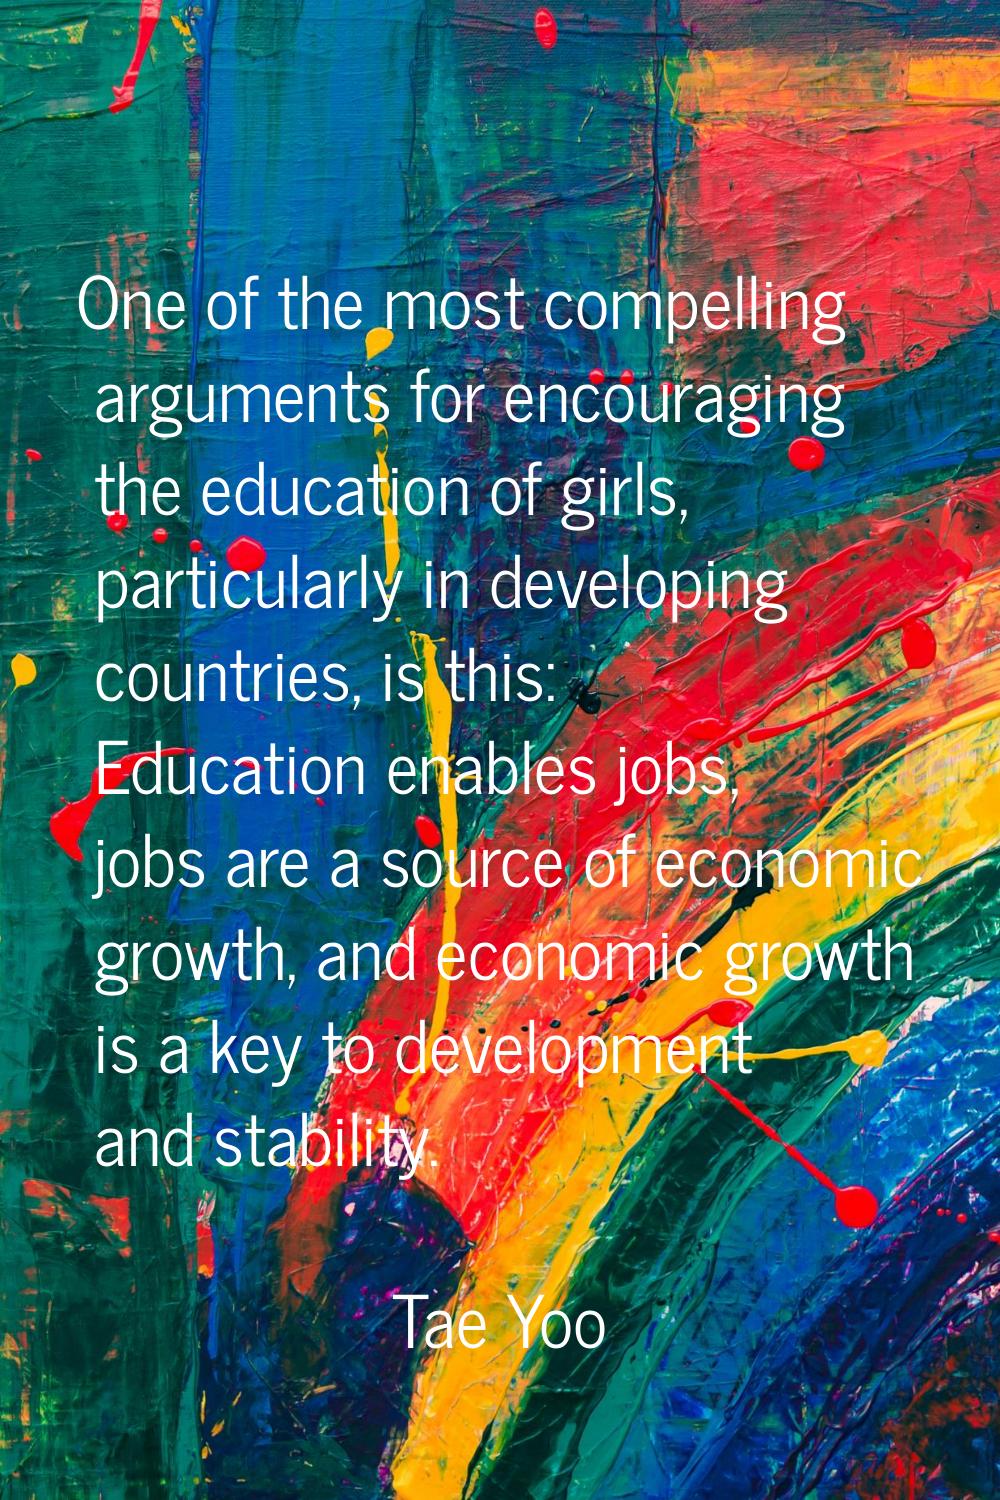 One of the most compelling arguments for encouraging the education of girls, particularly in develo